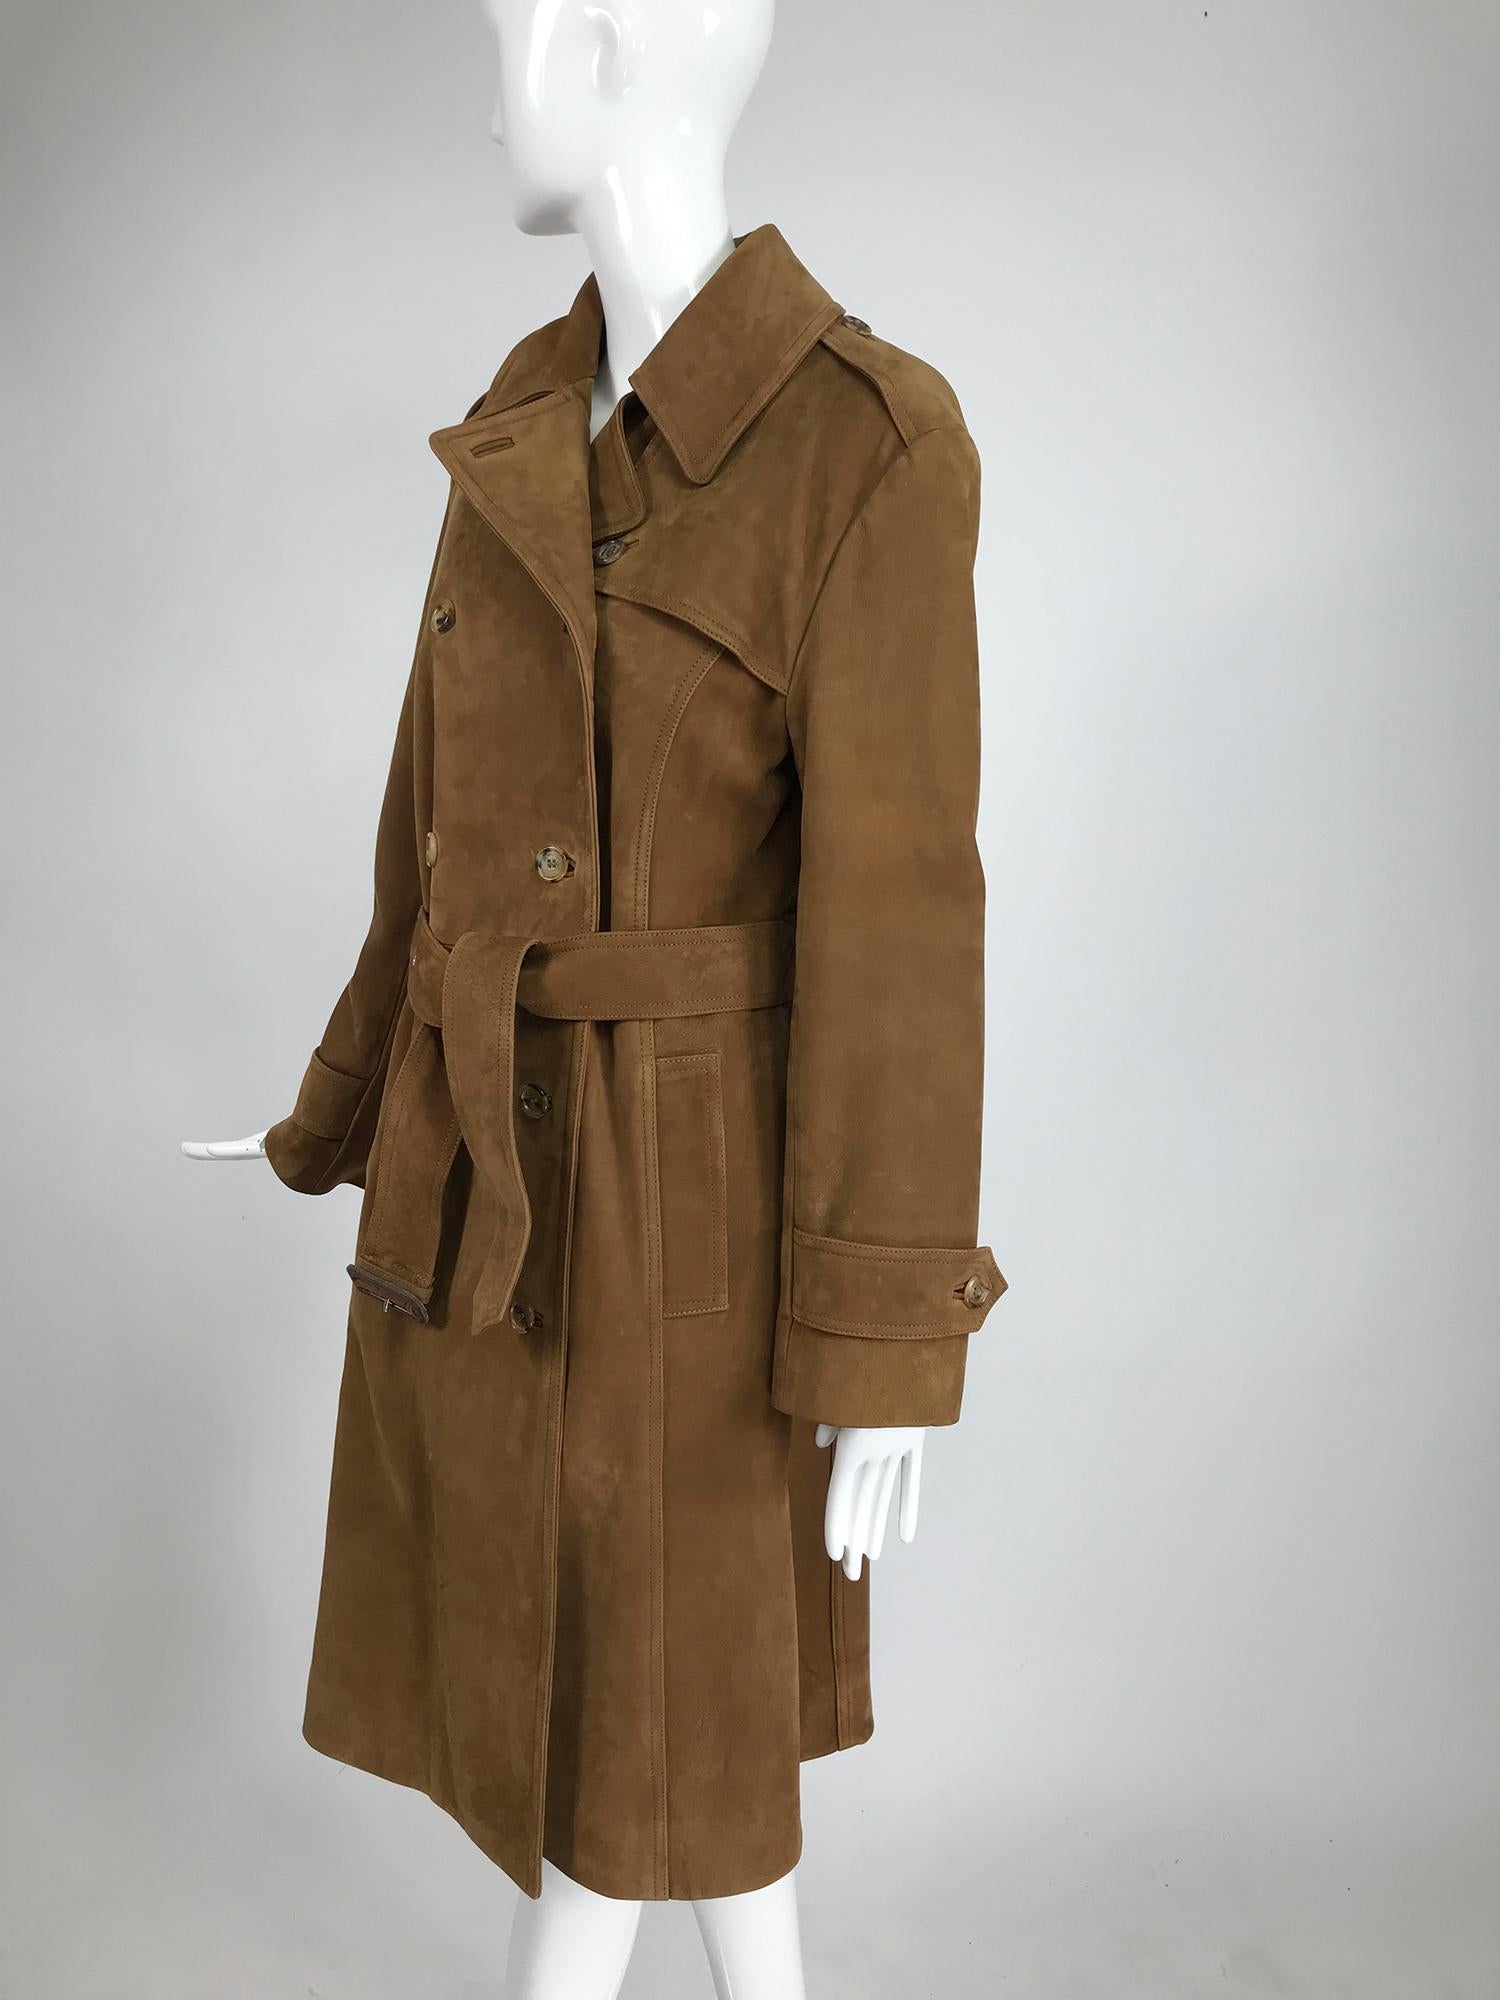 Vintage Burberrys' Hoxton tobacco brown suede trench coat from the 1990s, before they dropped the 